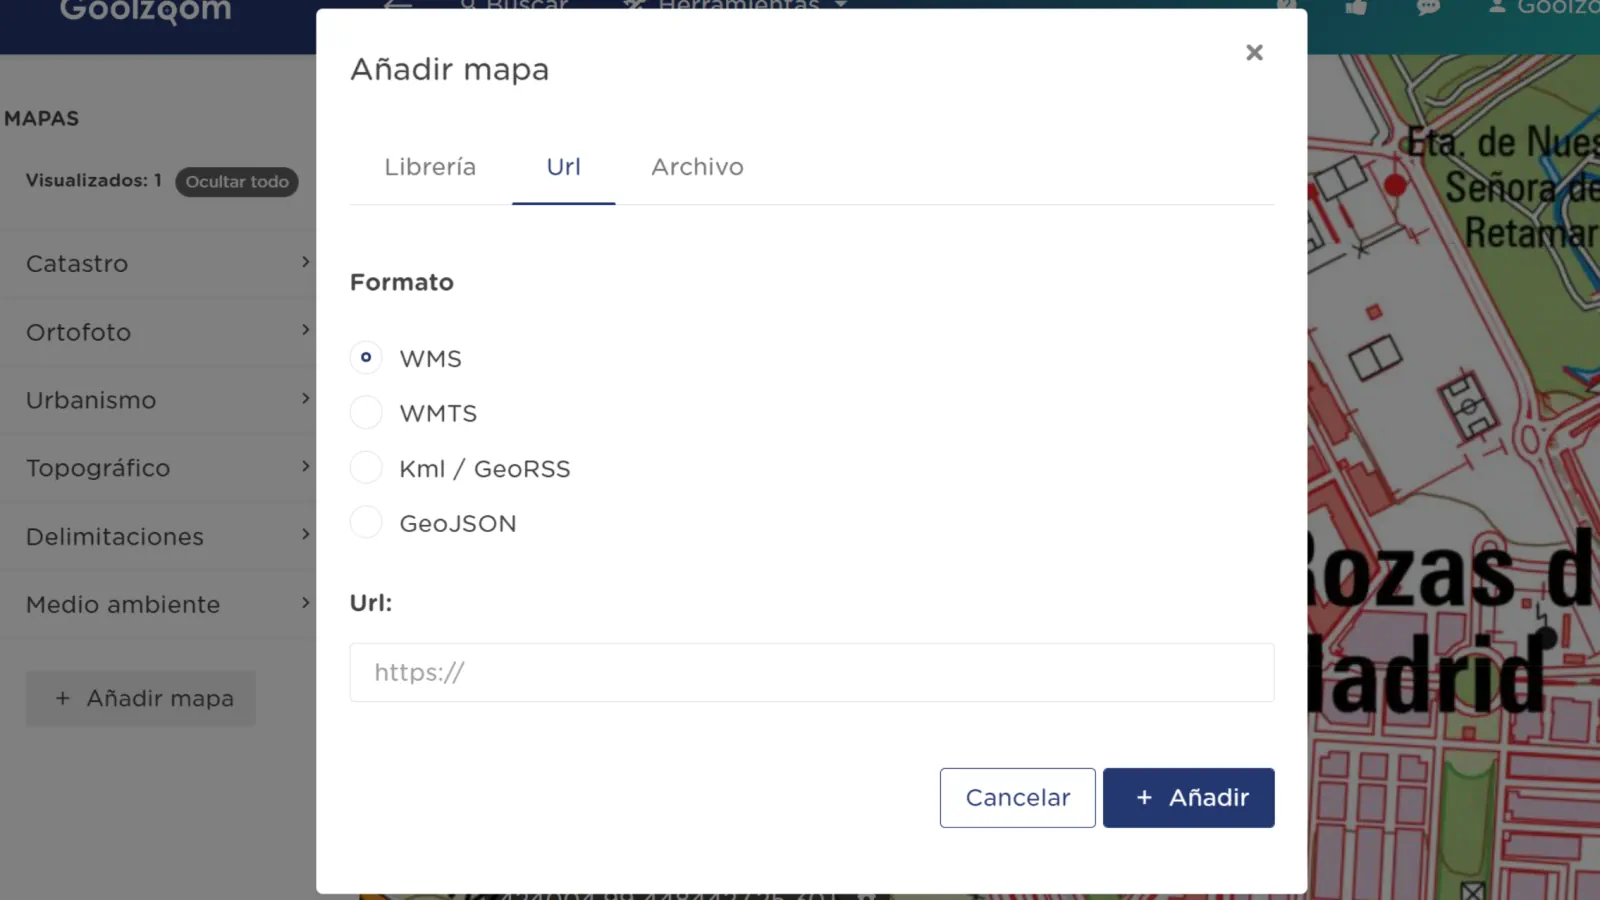 Add your maps